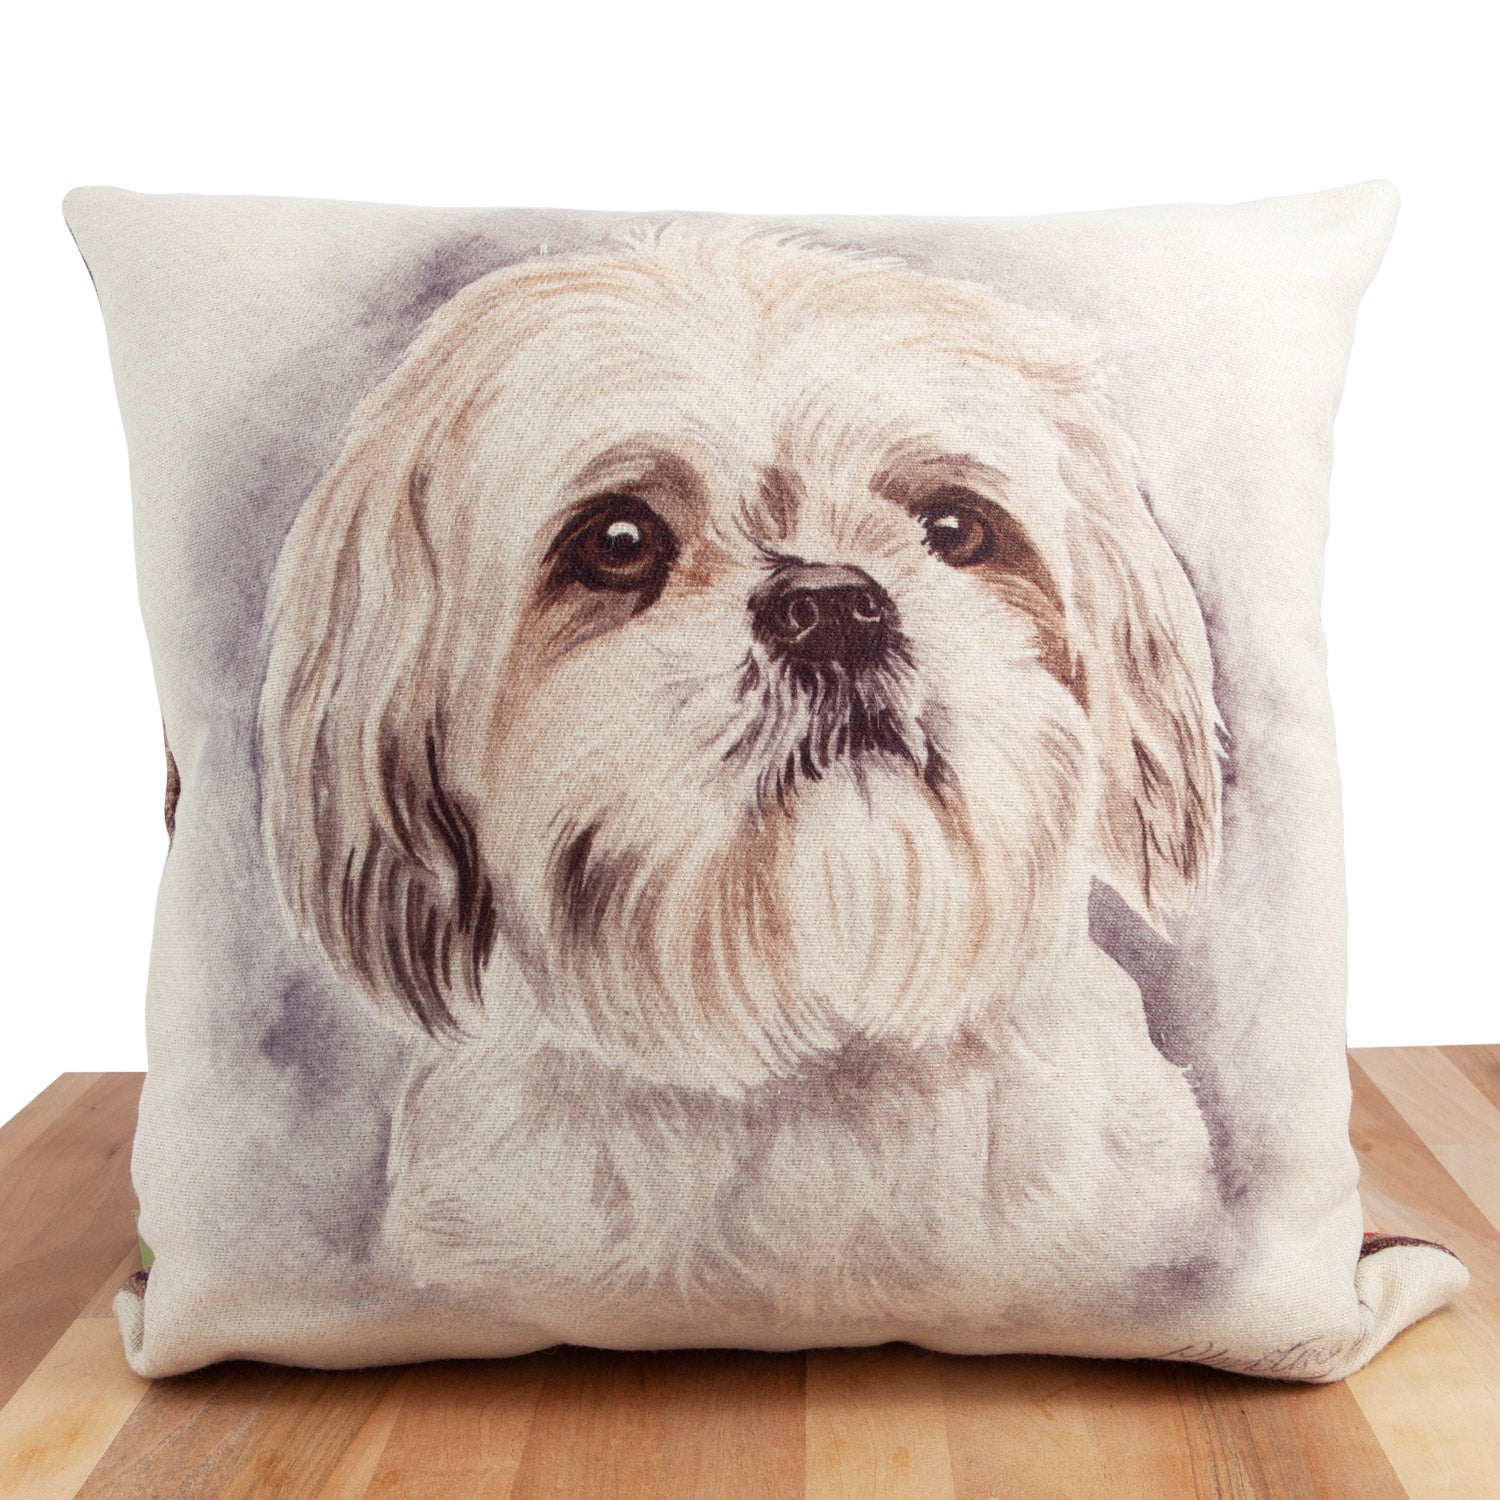 Dog Lover Gifts available at Dog Krazy Gifts. Shih Tzu Cushion, part of our Christine Varley collection – available at www.dogkrazygifts.co.uk